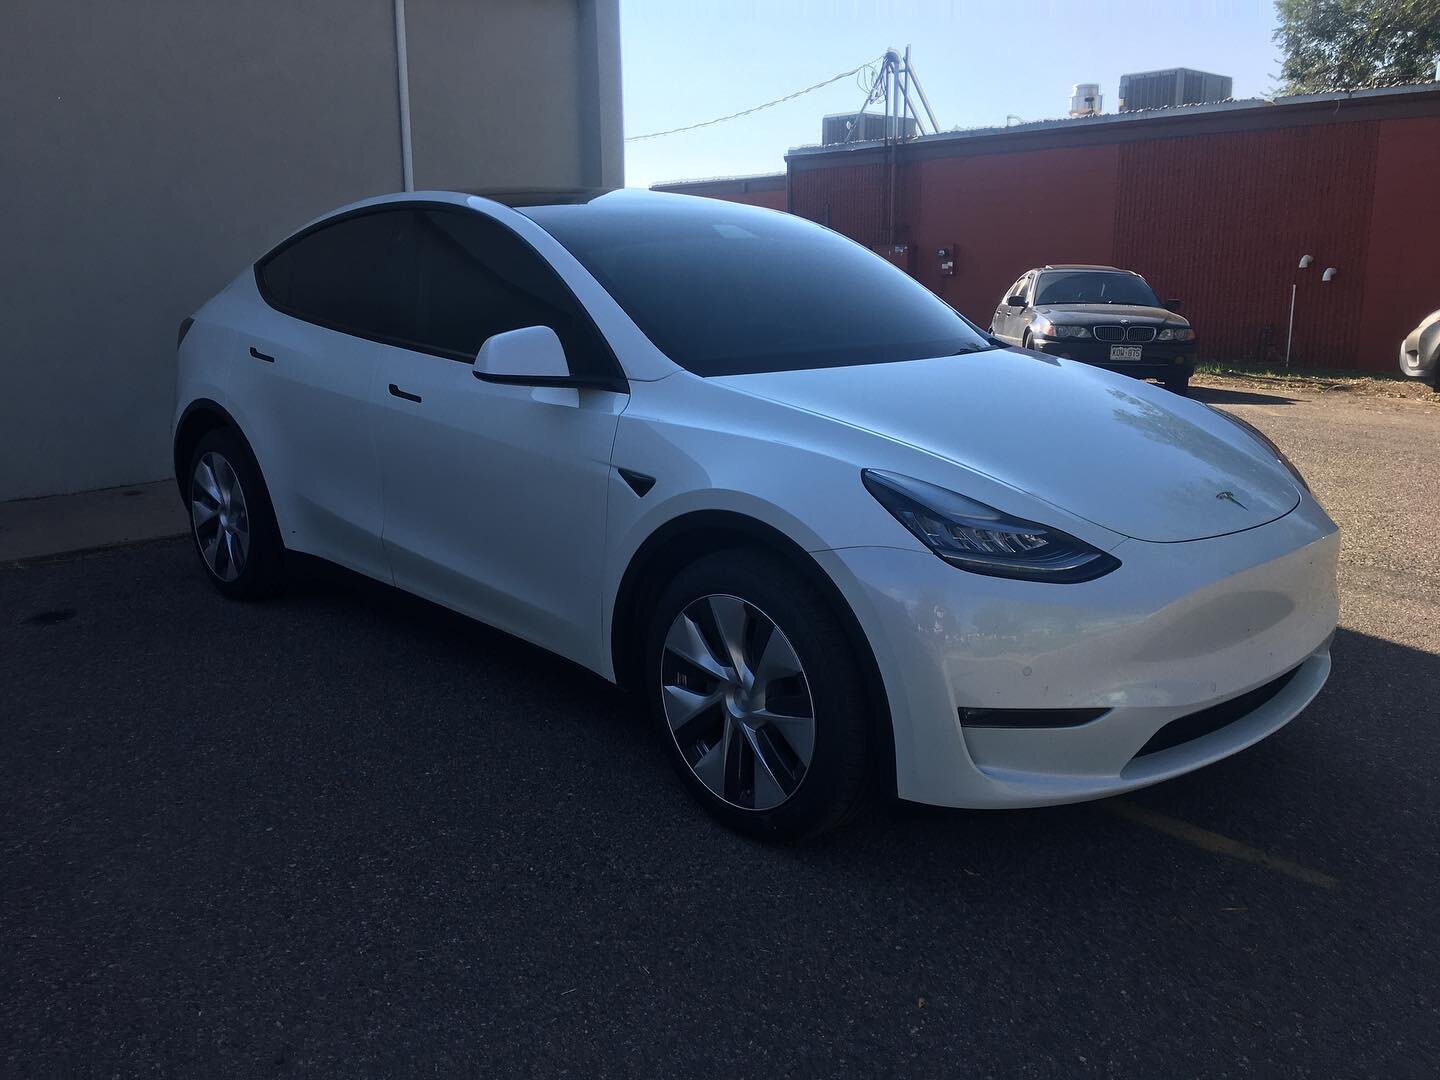 Another busy day filled with ceramic tint jobs. We also did a removal and re install on a Honda that had horrible old tint. It&rsquo;s amazing how much a re tint can do to improve the look of your ride!
.
.
.
.
.

#tesla #teslamodel3 #teslamodels #te